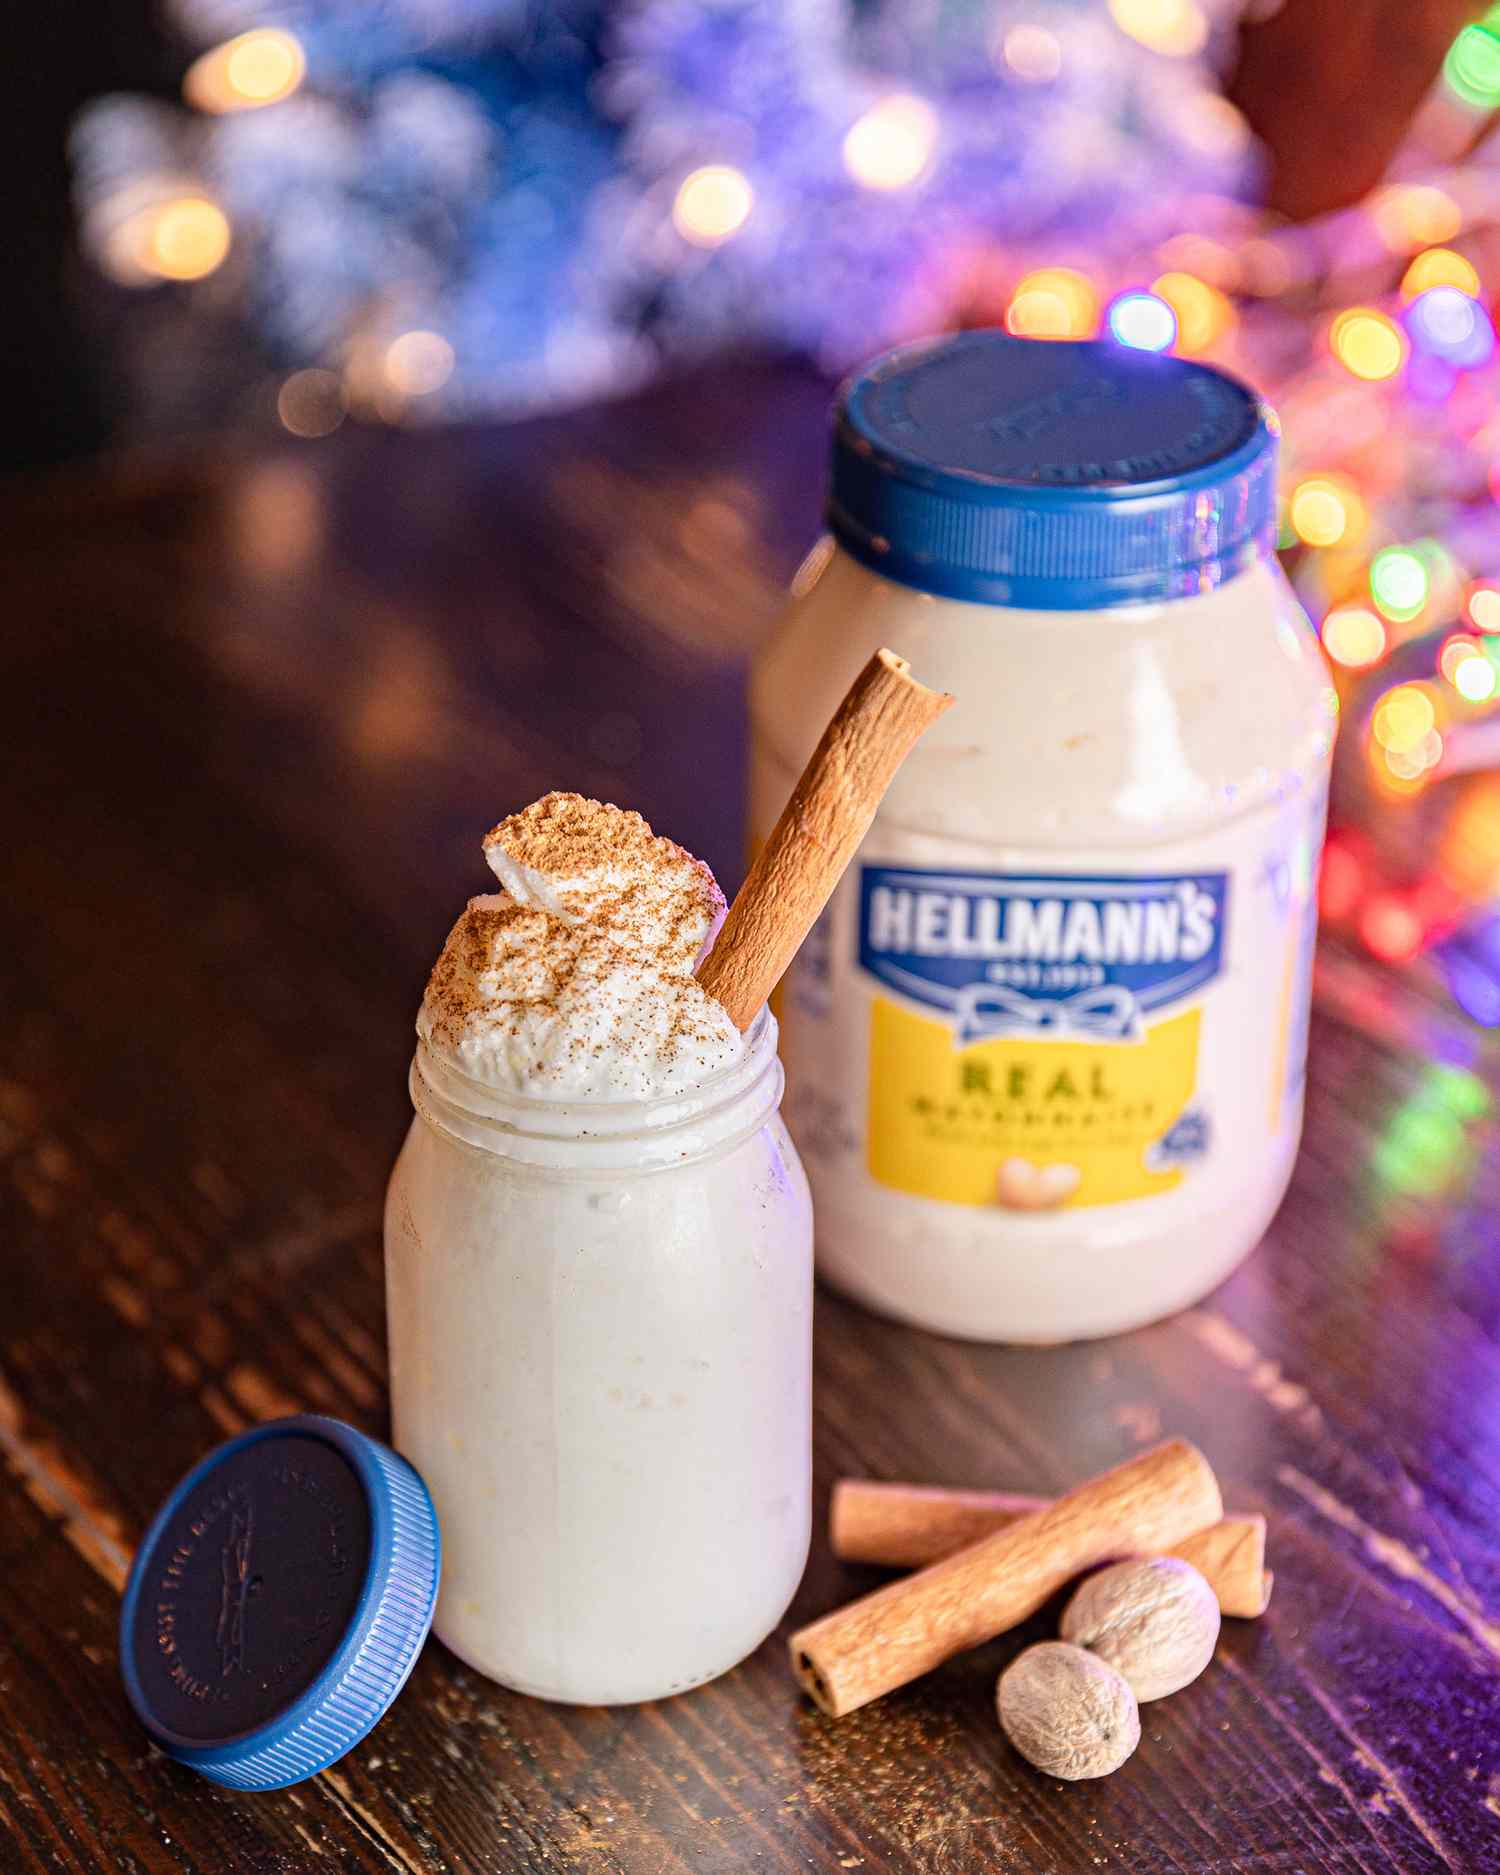 Would You Try This Mayo Nog?